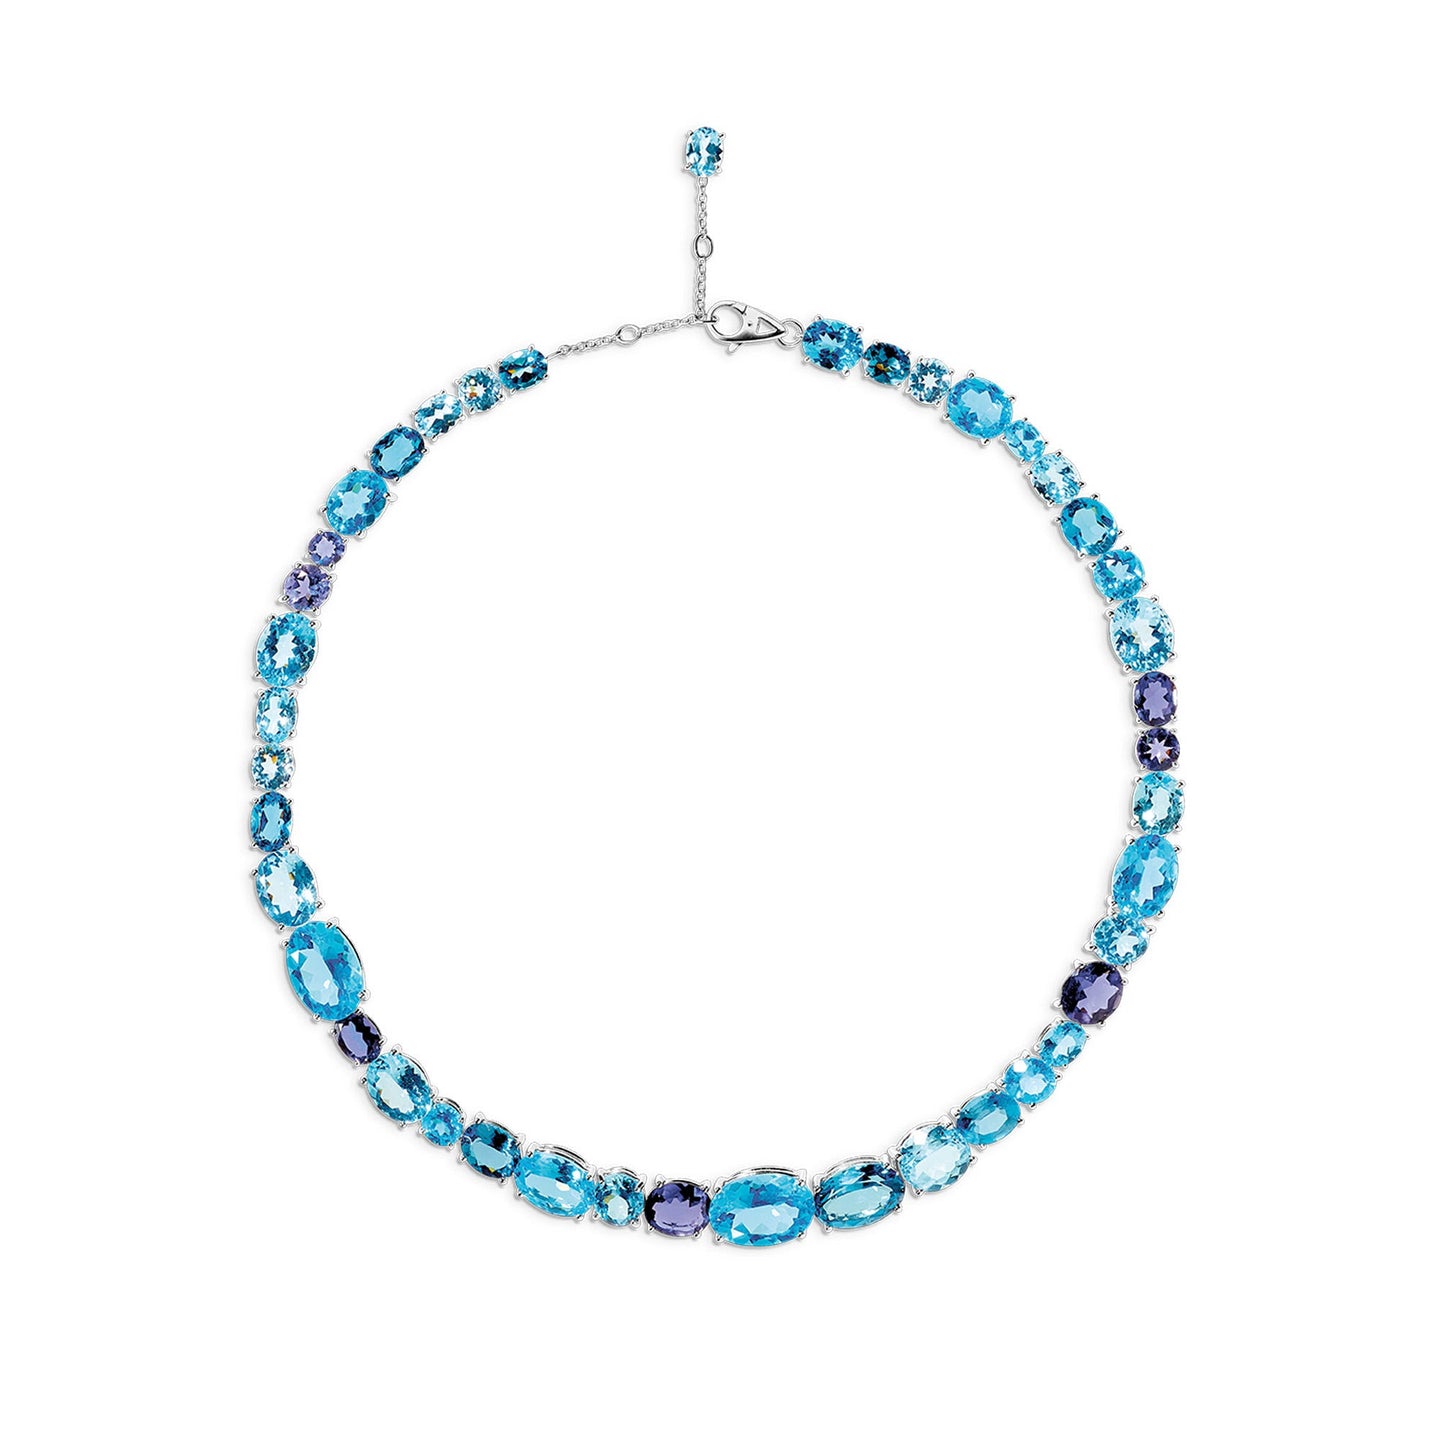 Chaos Necklace in 18ct White Gold with Blue Topaz and Iolites